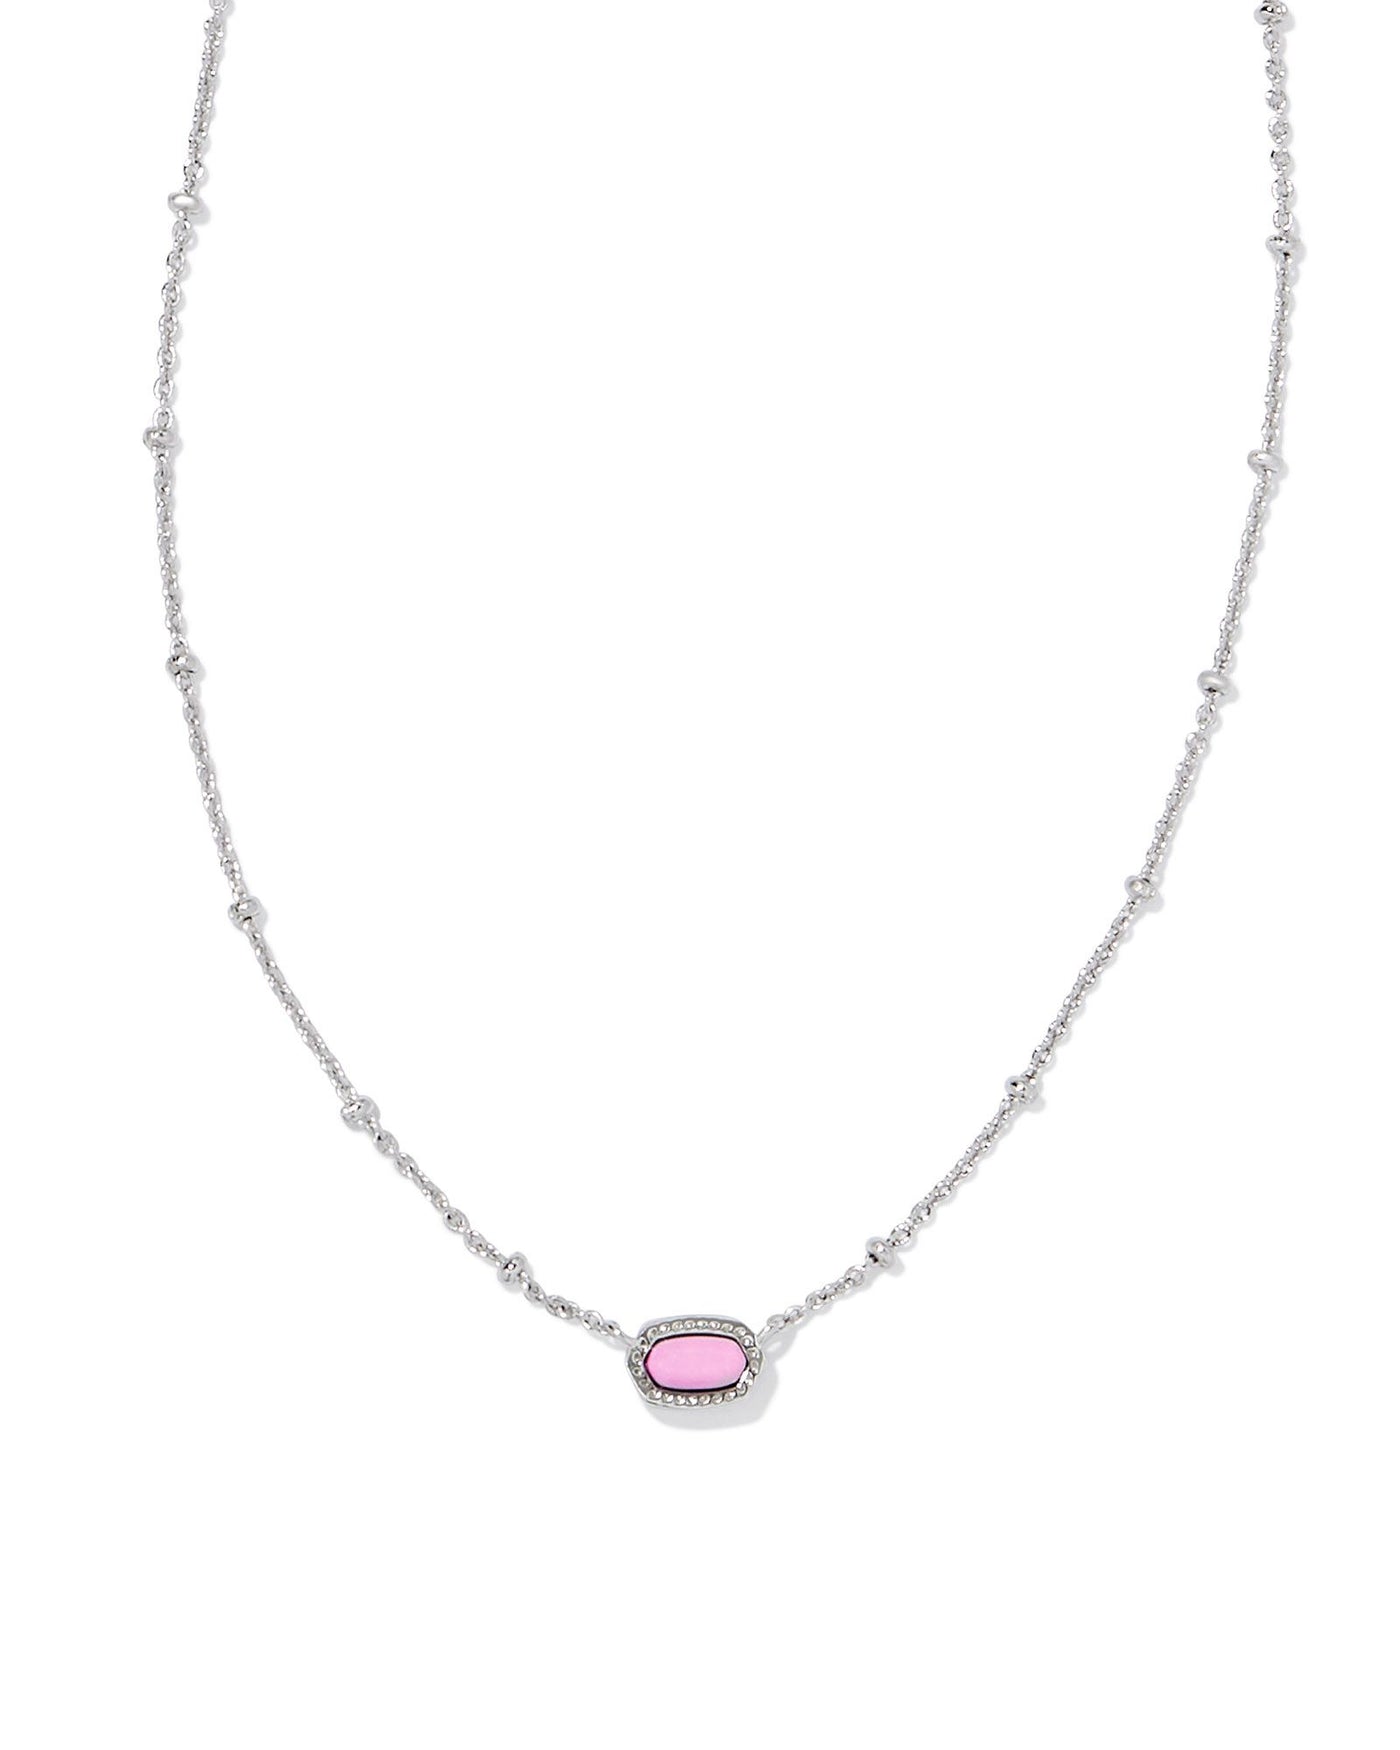 Kendra Scott Mini Elisa Satellite Necklace in Silver Pink Magnesite on white background close up.